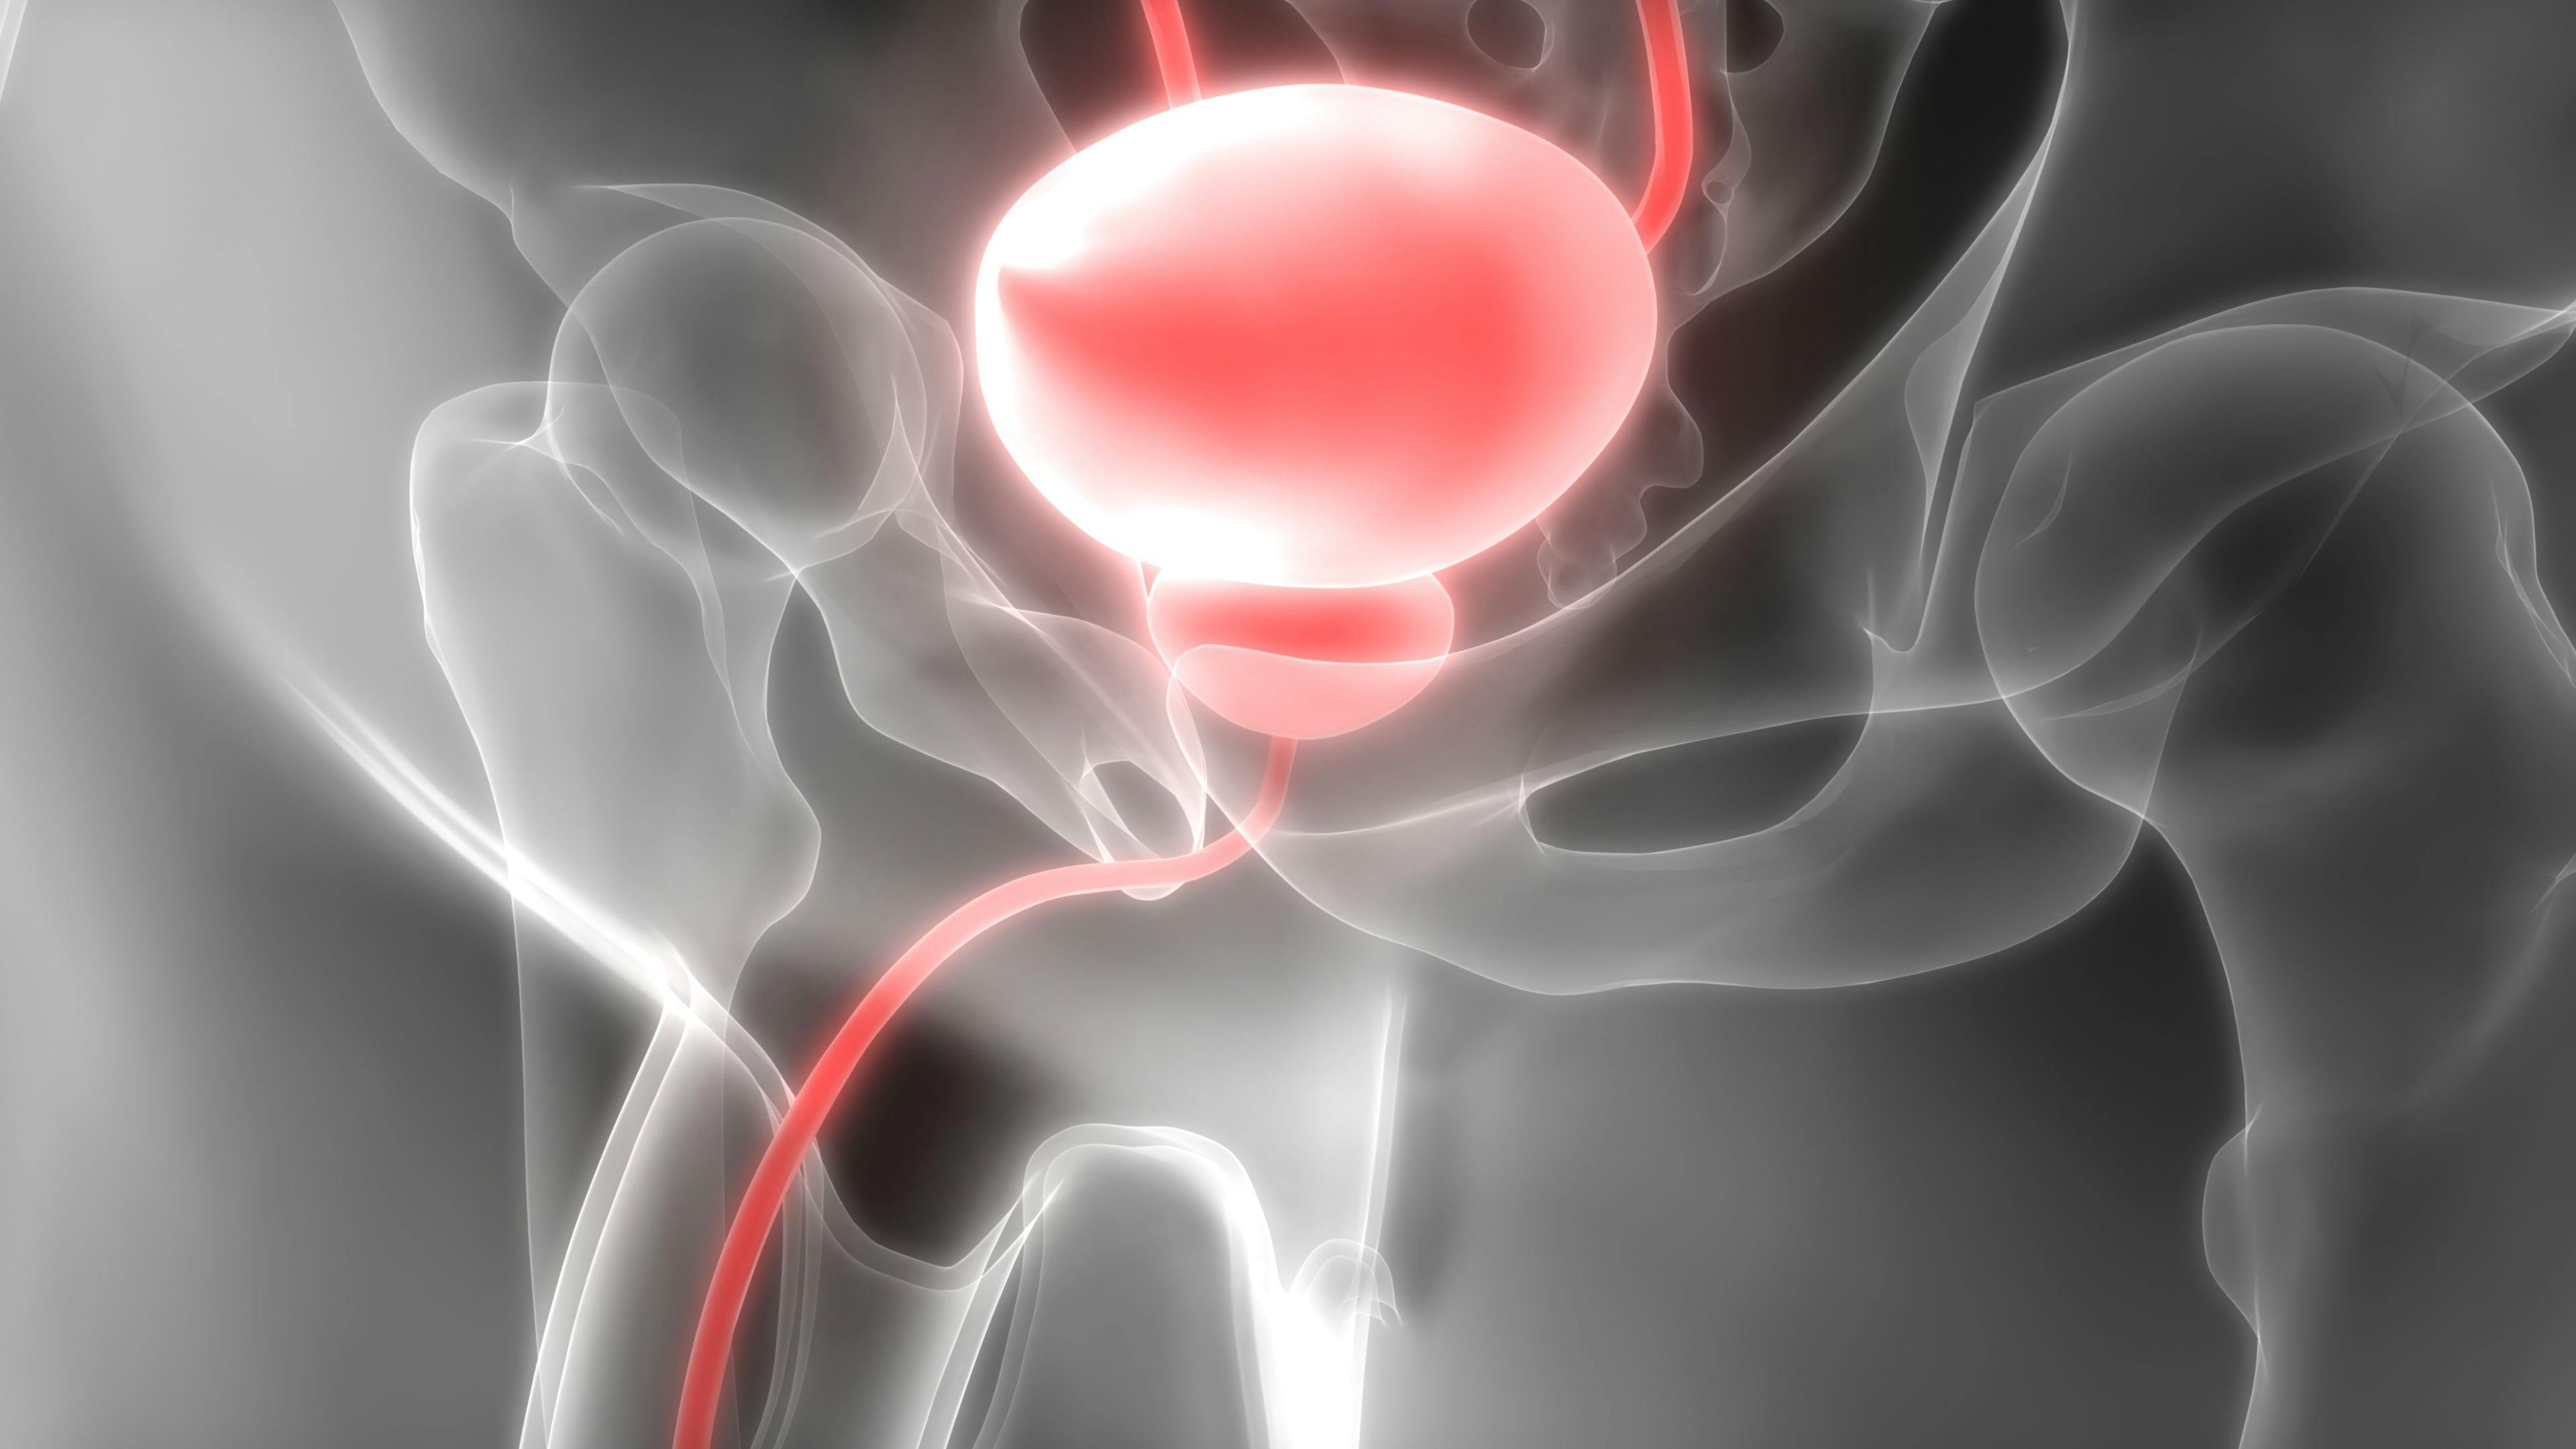 Findings from the phase 3 PRESTO trial indicated that patients with high-risk biochemically recurrent prostate cancer may derive benefit from treatment with androgen deprivation therapy intensification and apalutamide.